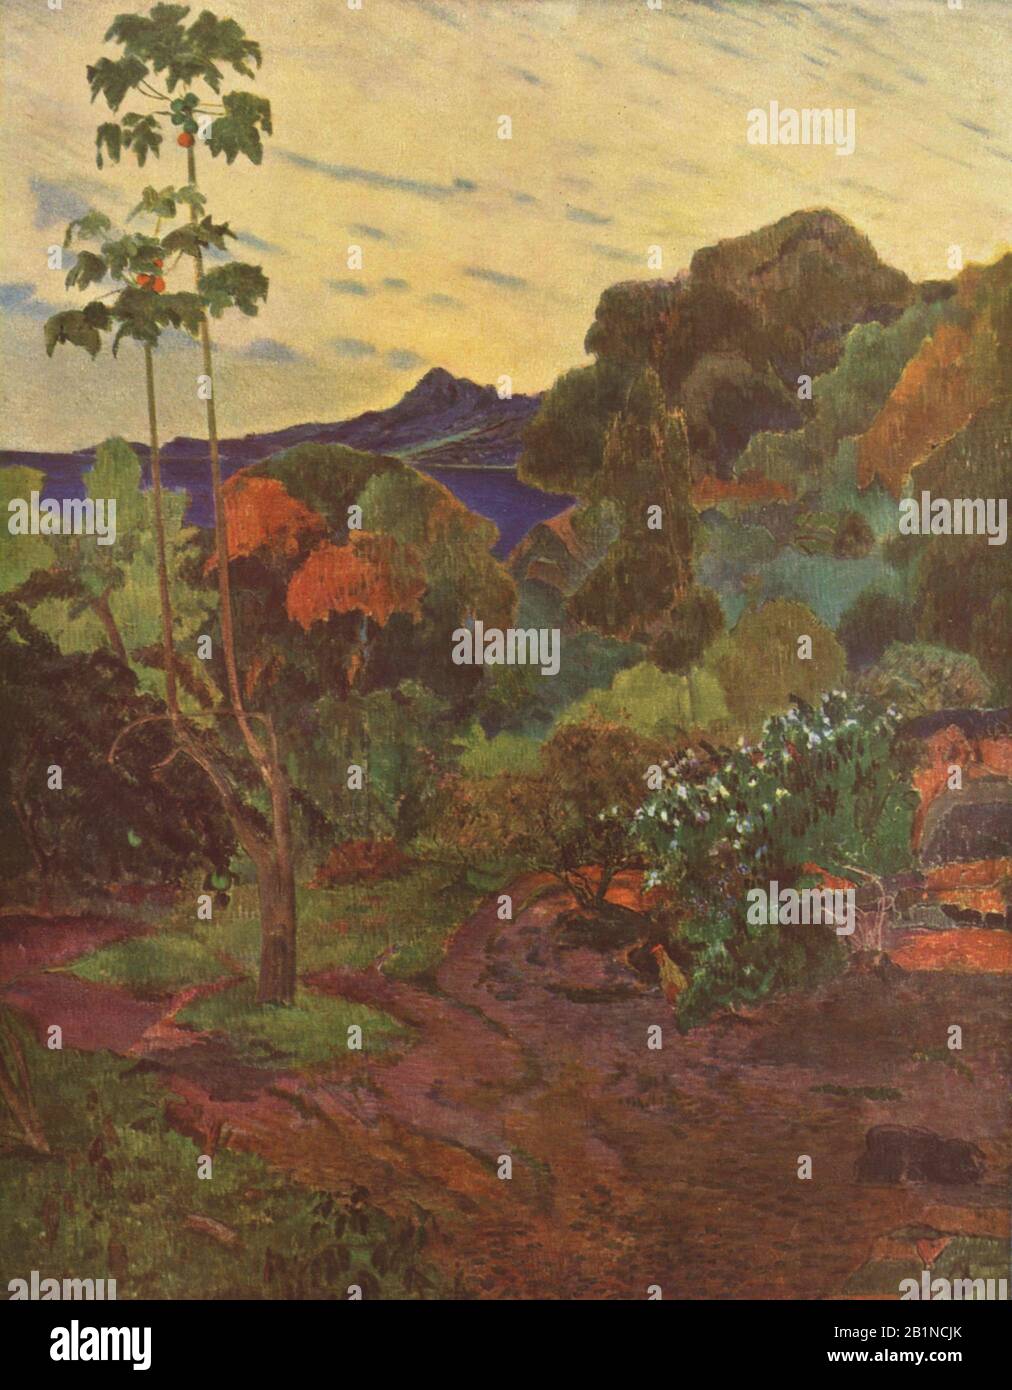 Tropical Vegetation (Végétation tropicale) Martinique Landscape (1887) 19th Century Painting by Paul Gauguin - Very high resolution and quality image Stock Photo